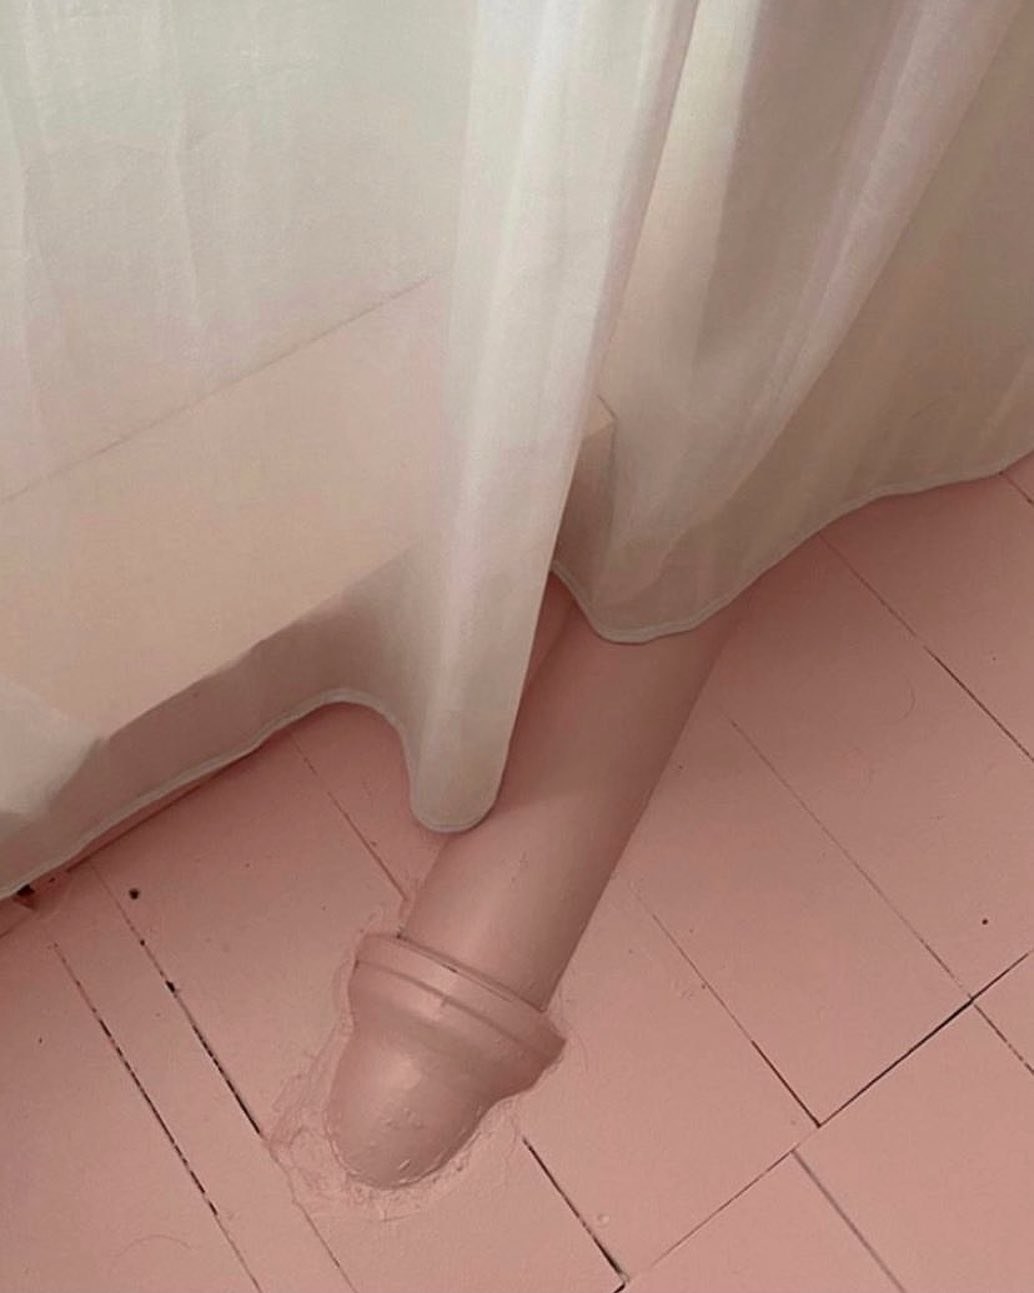 Pipe emerging from a floorboard painted the same color as the floor and looking like a large penis